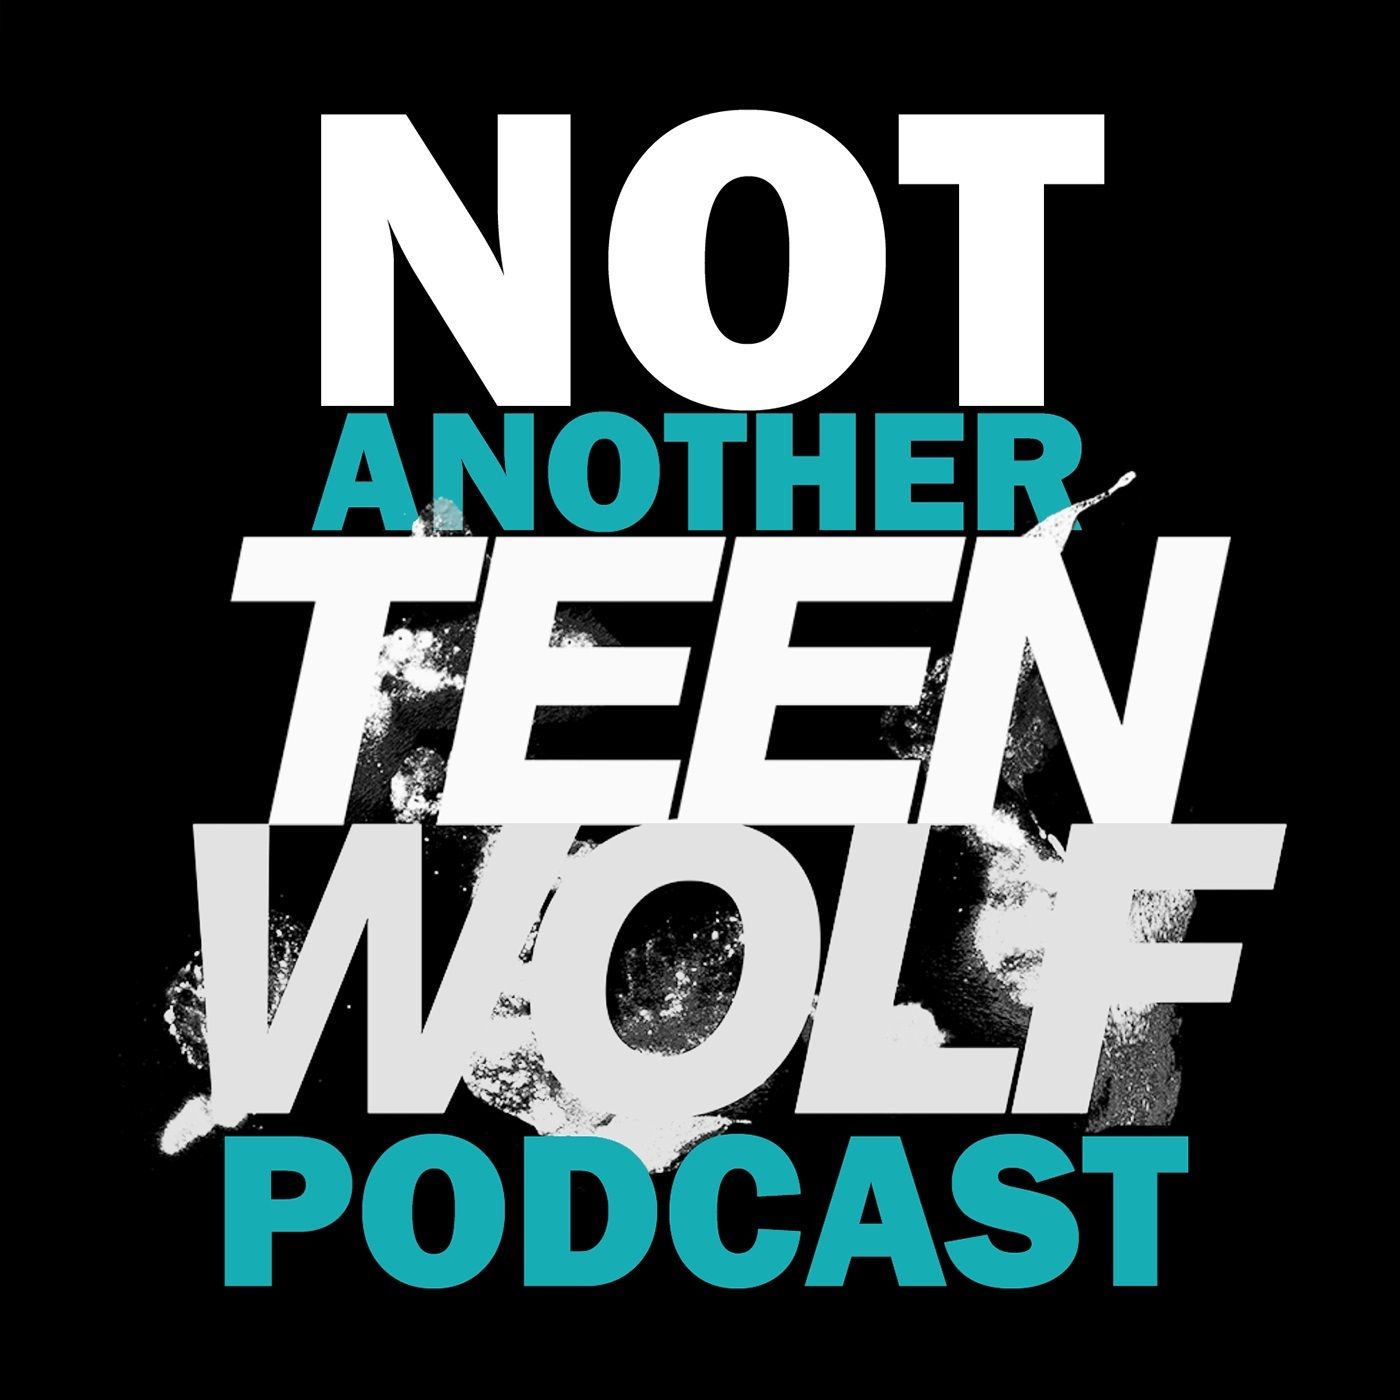 Not another teen. Not another one компания. Yet another Podcast.